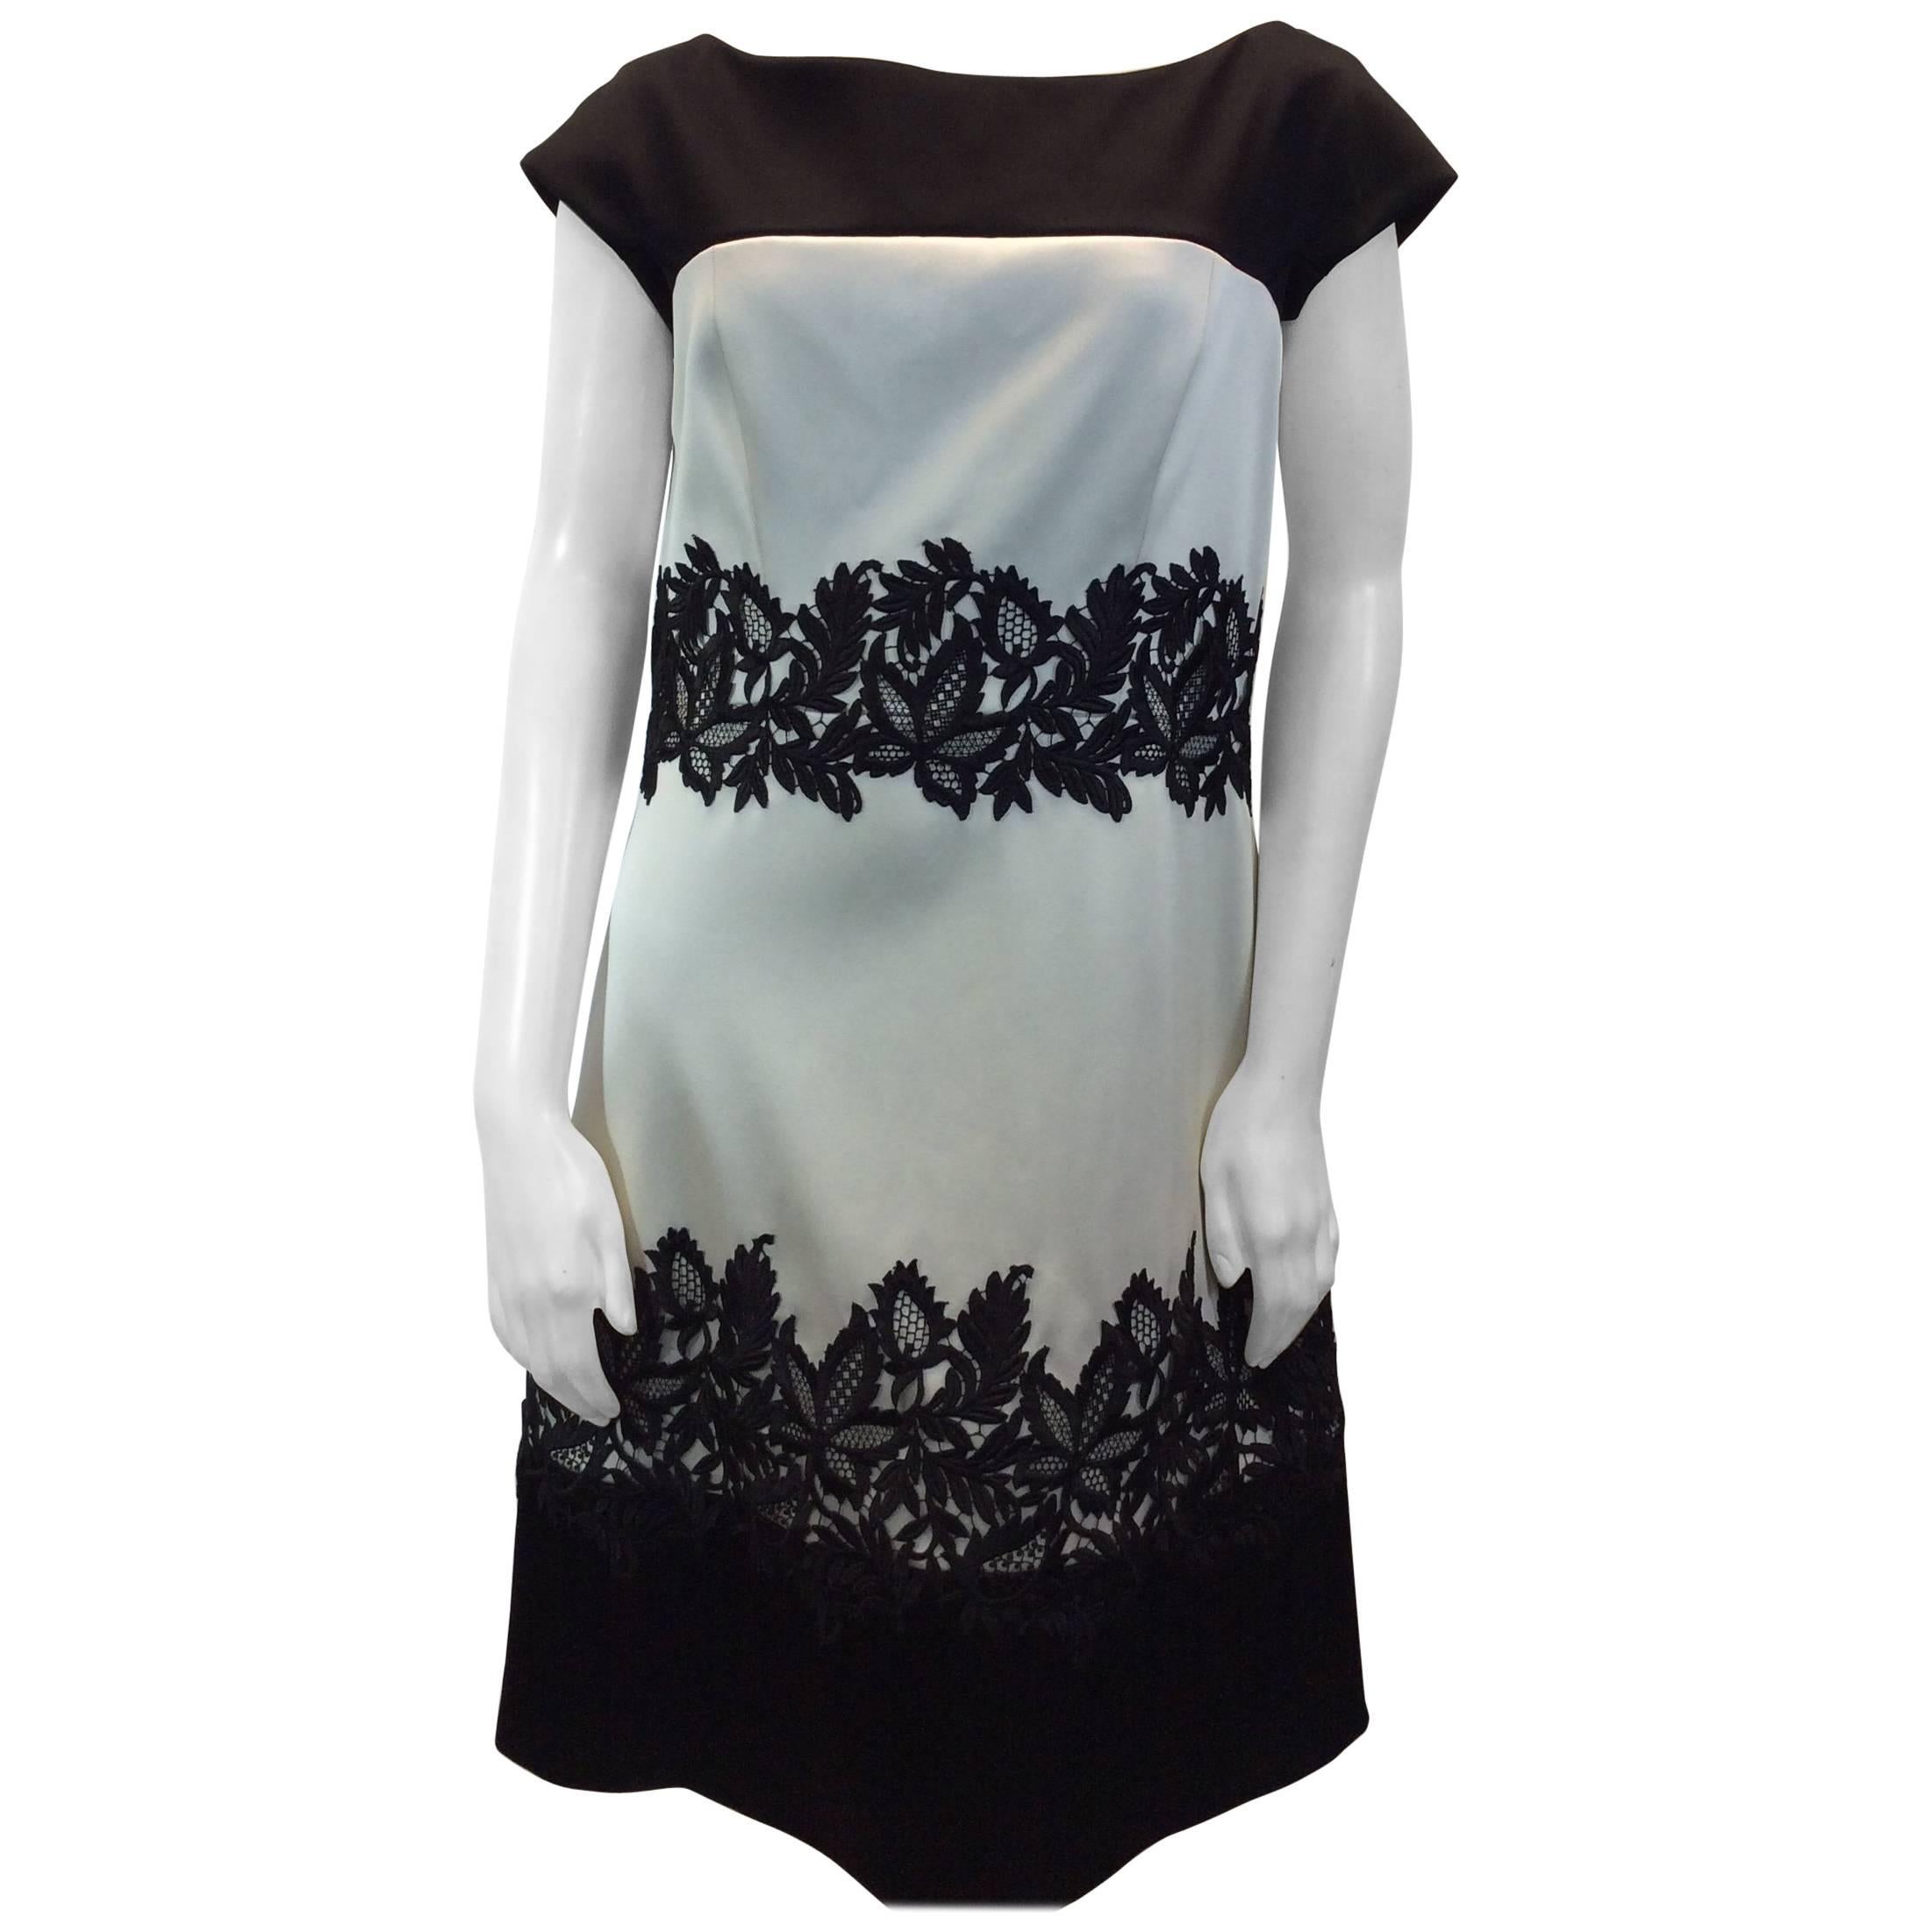 J. Mendel White and Black Lace Dress For Sale